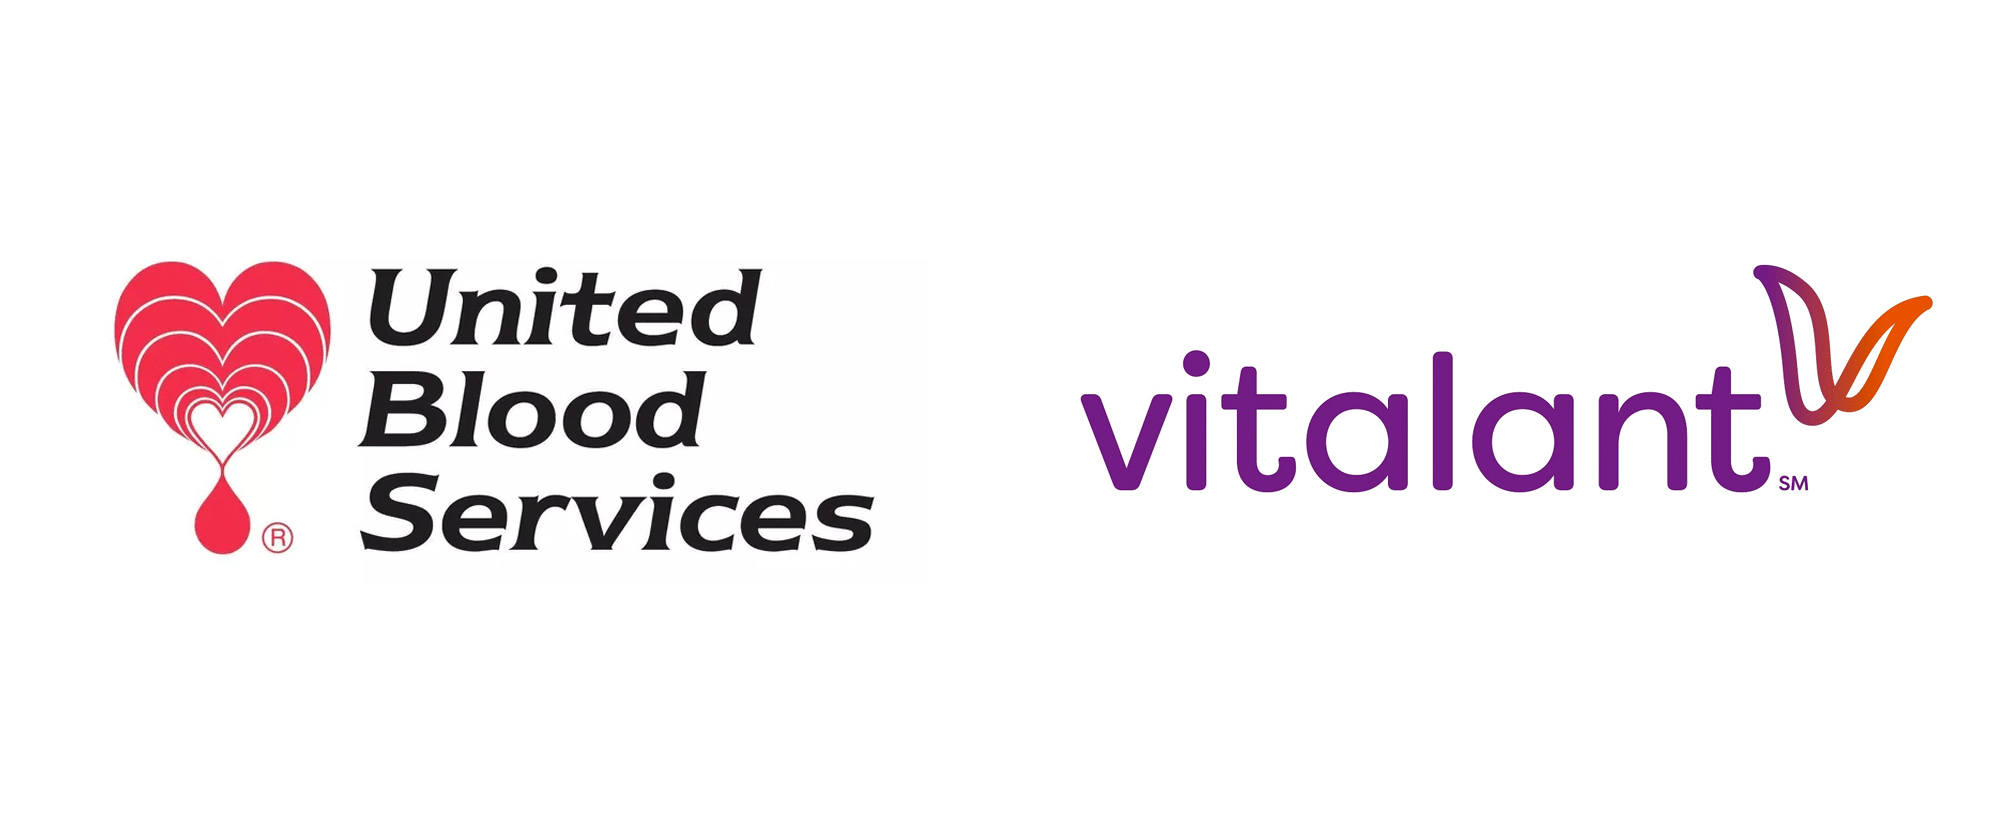 New Name and Logo for Vitalant by Monigle